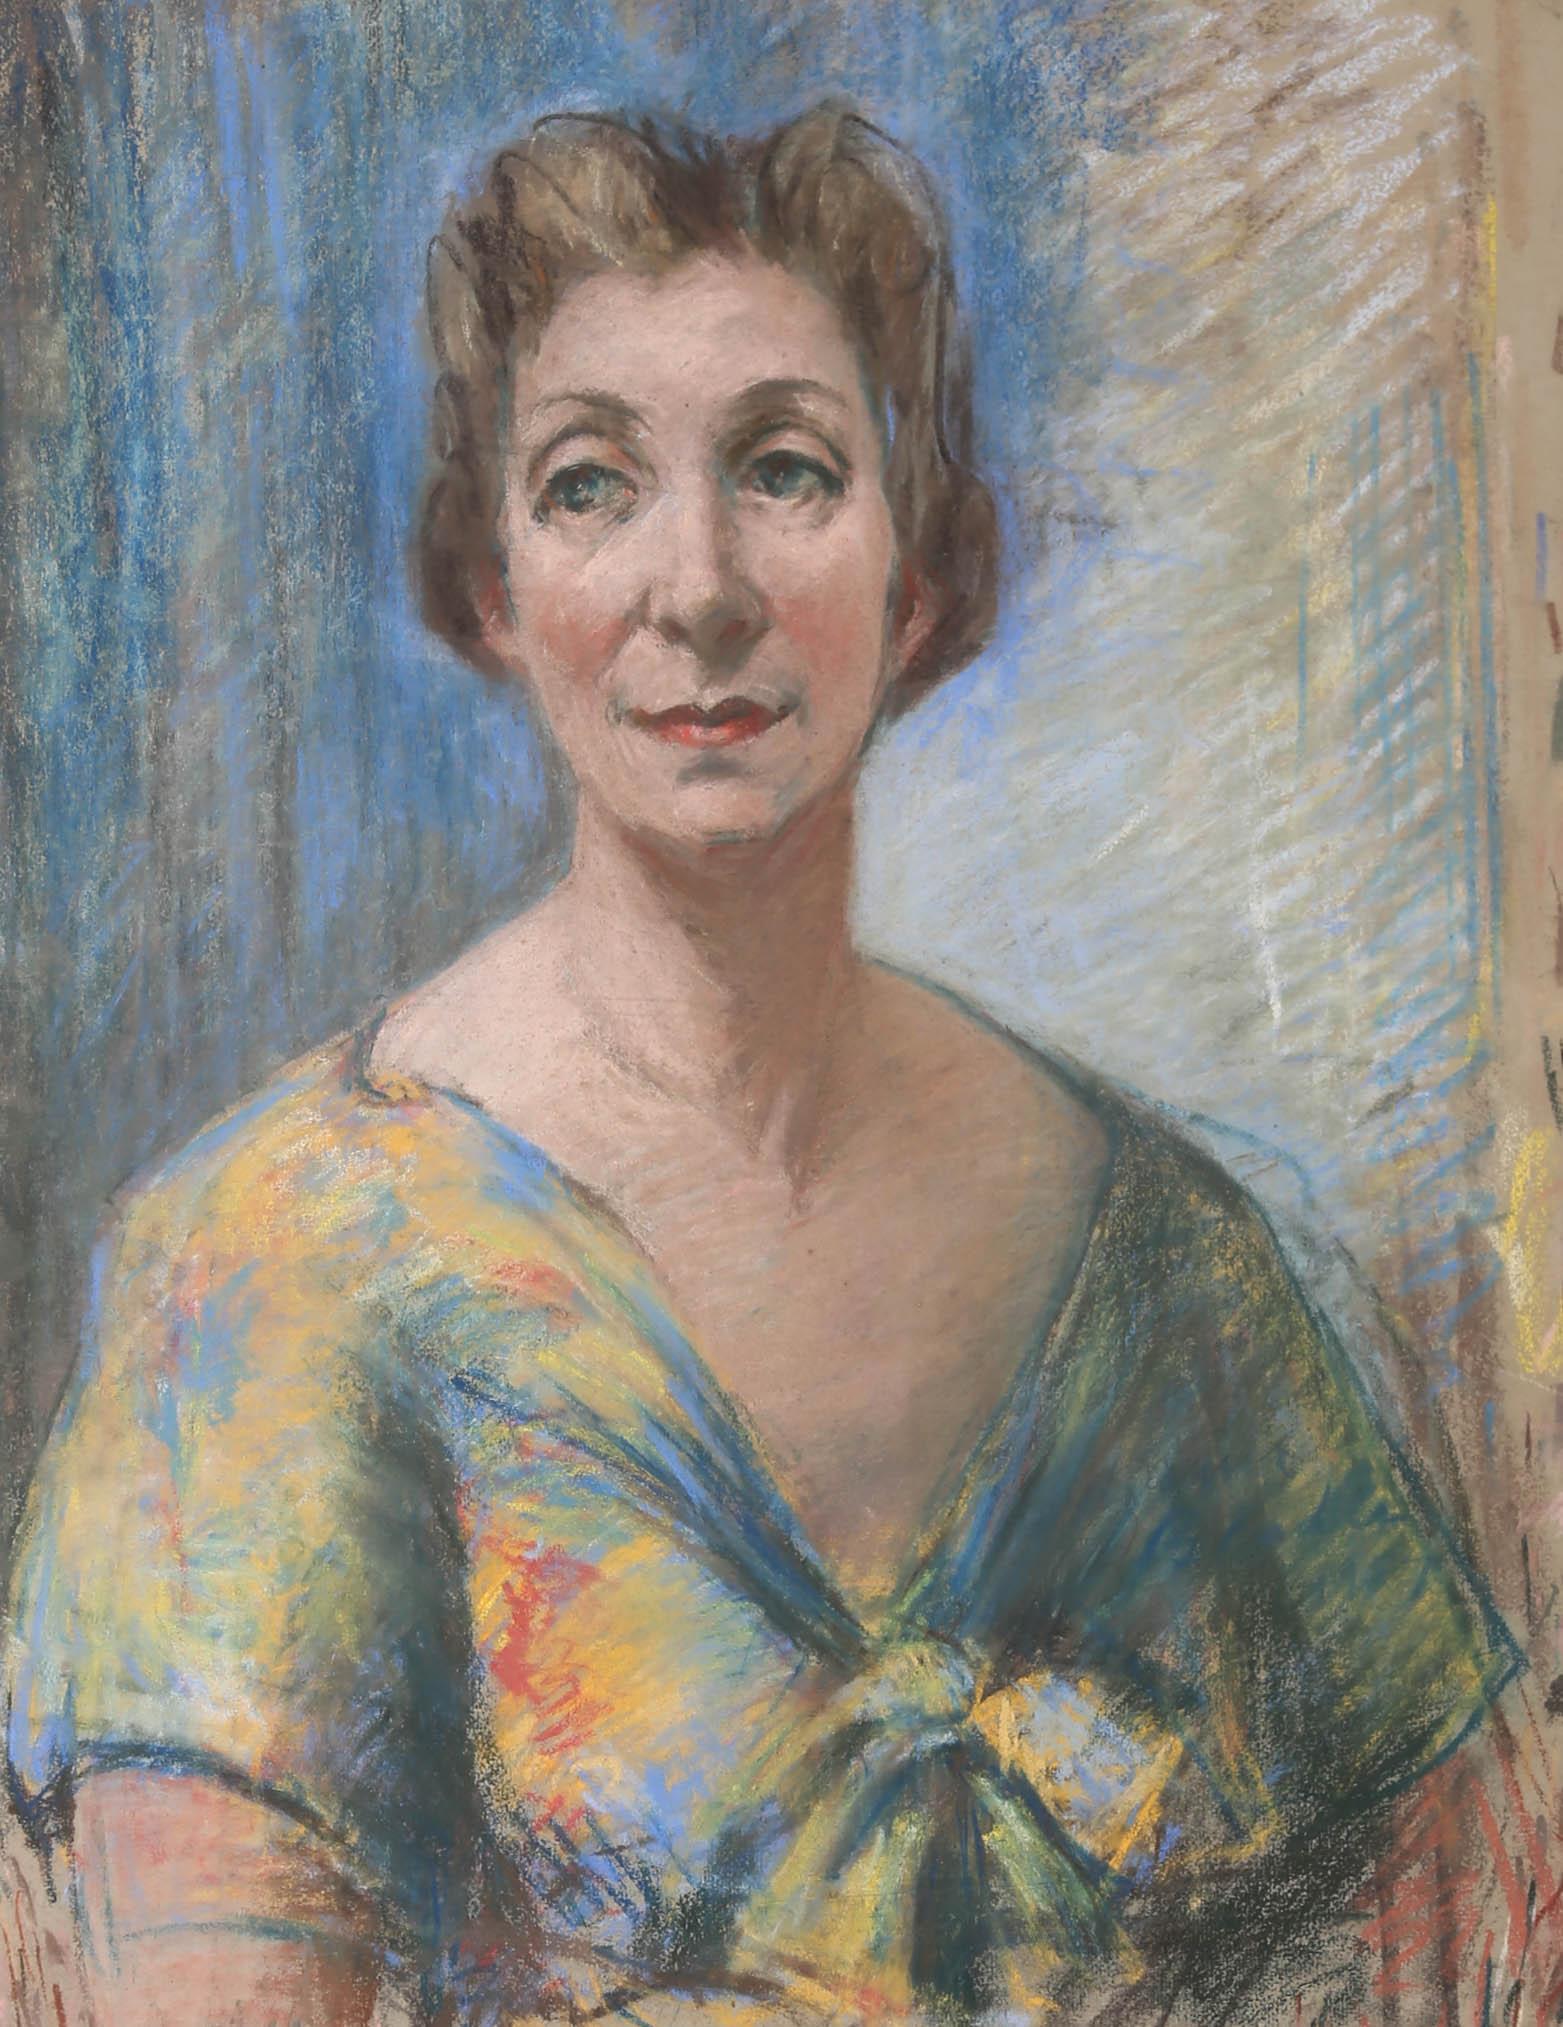 Unknown Portrait - Mid 20th Century Pastel - Lady In A Summer Dress